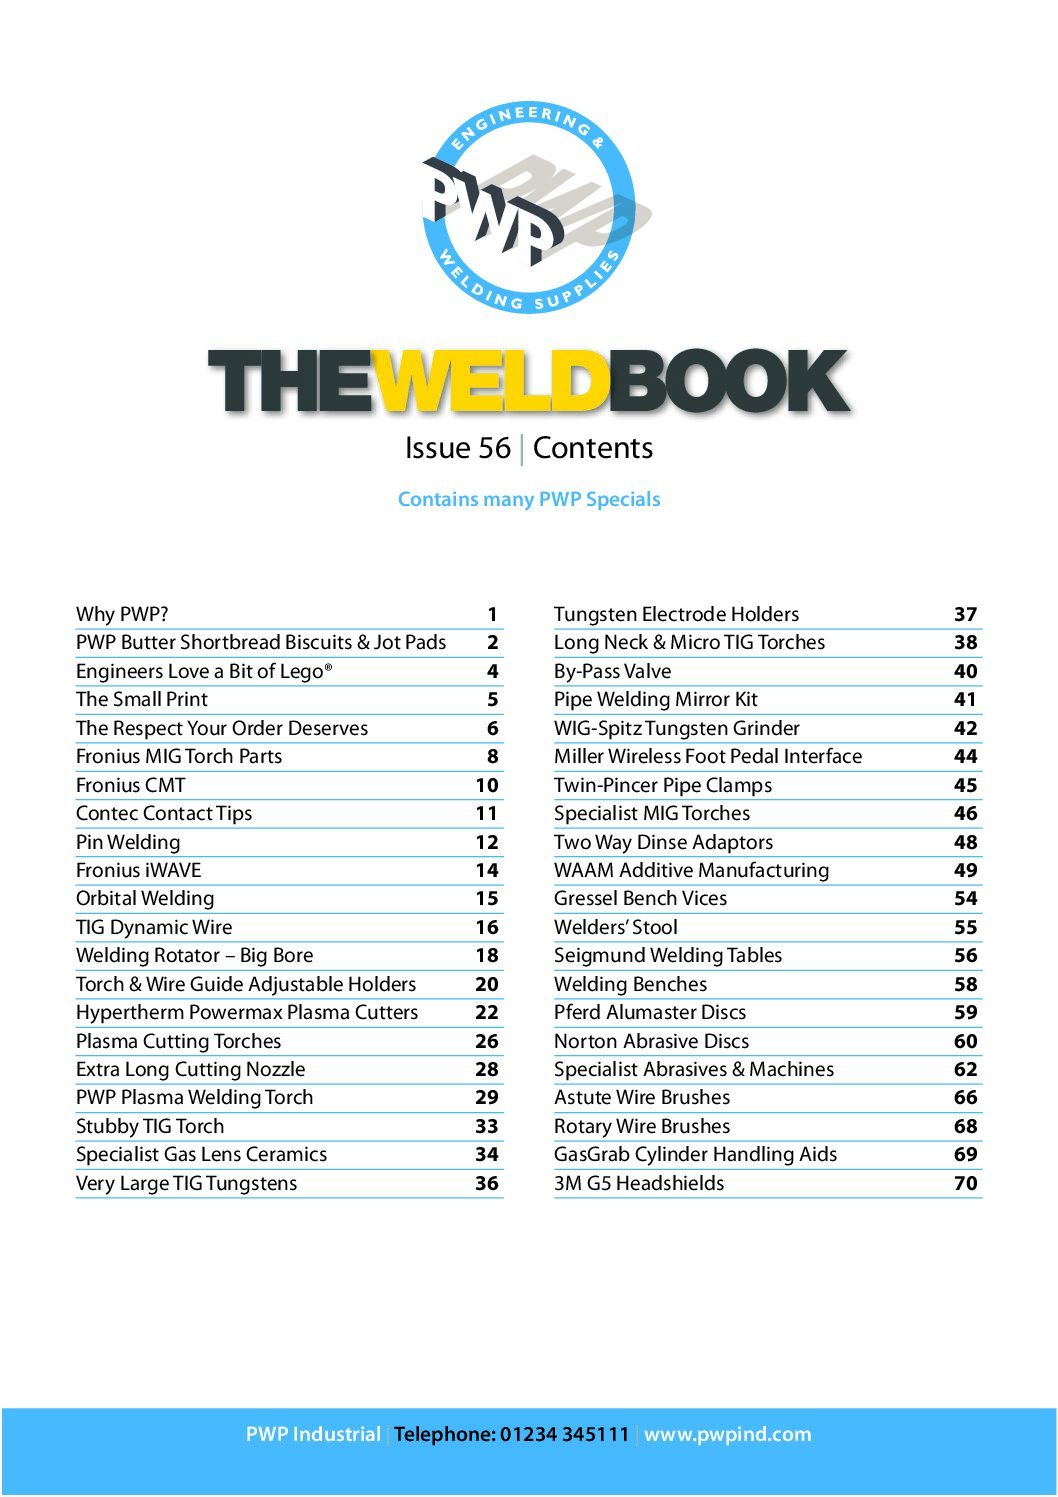 The Weld Book 56 Contents Page